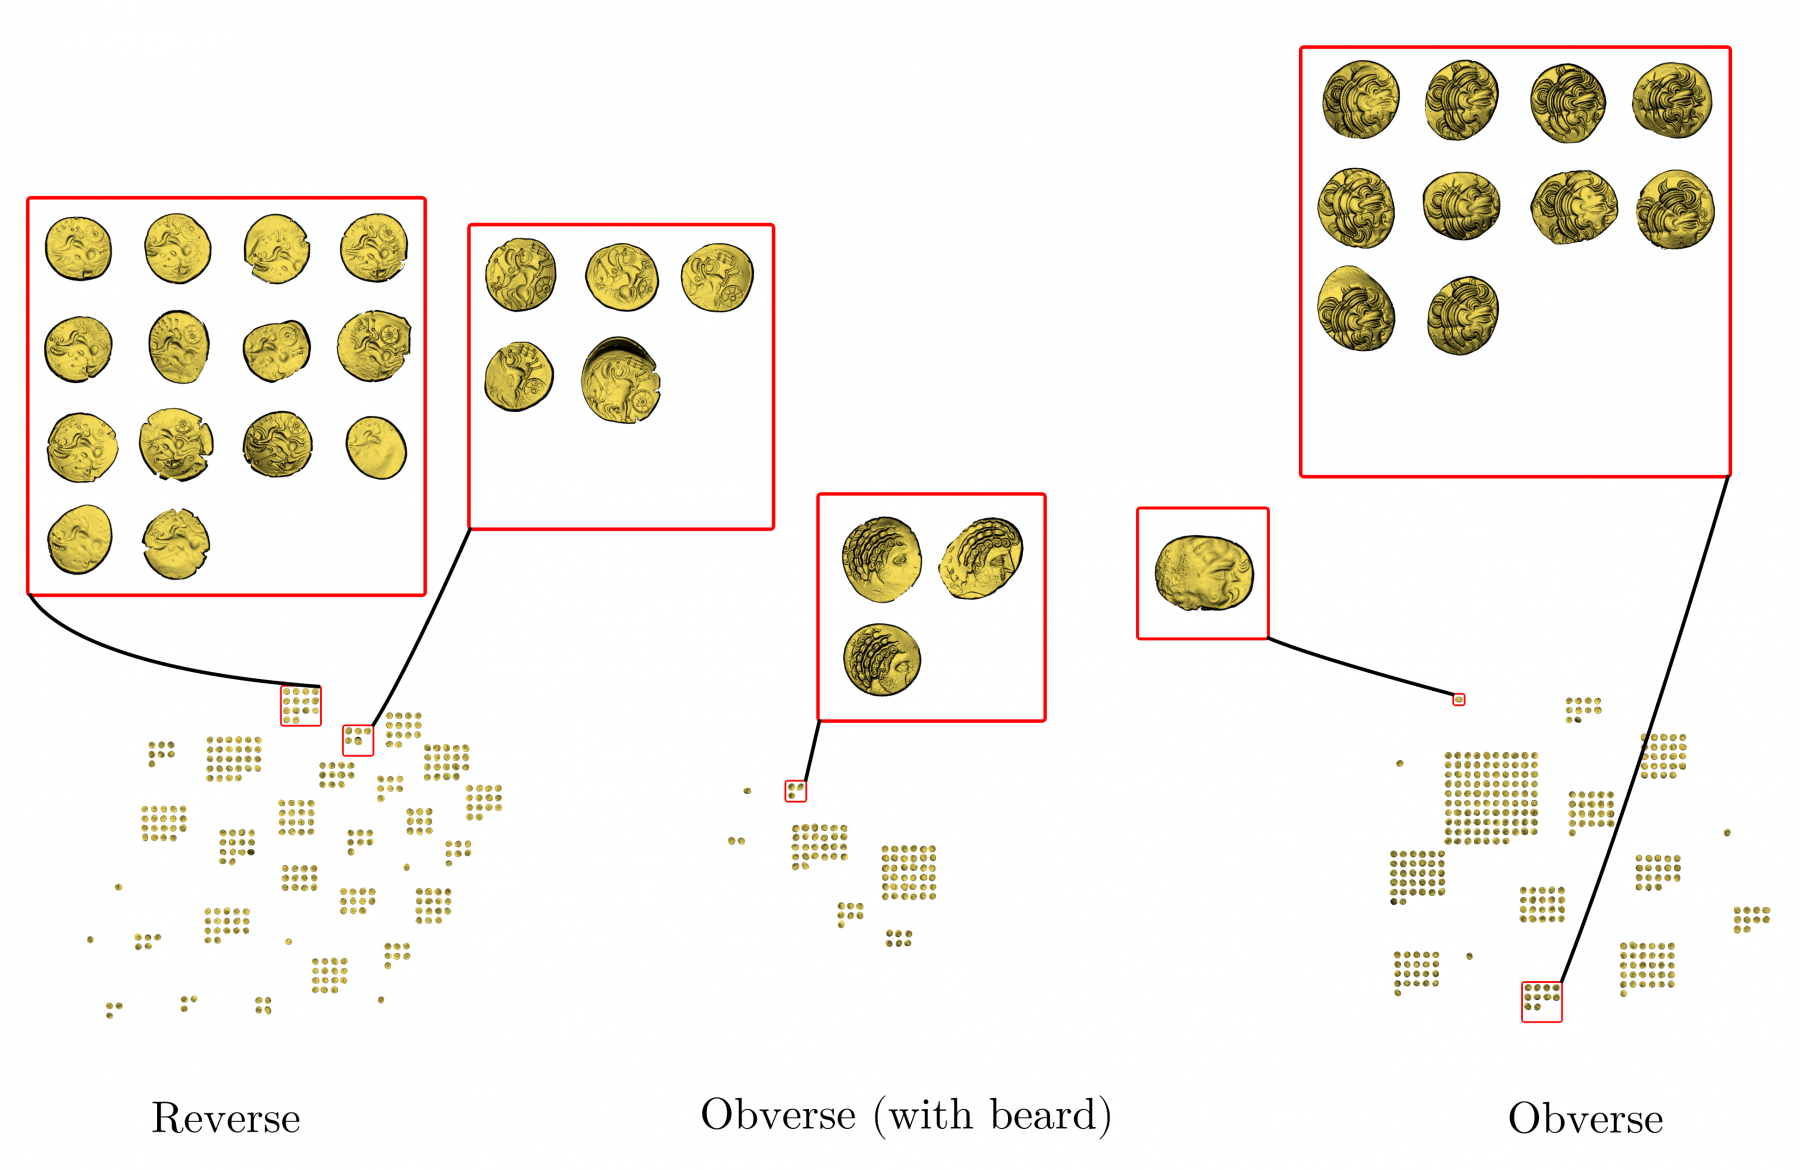 Synthetic view of the clustering test set into dies